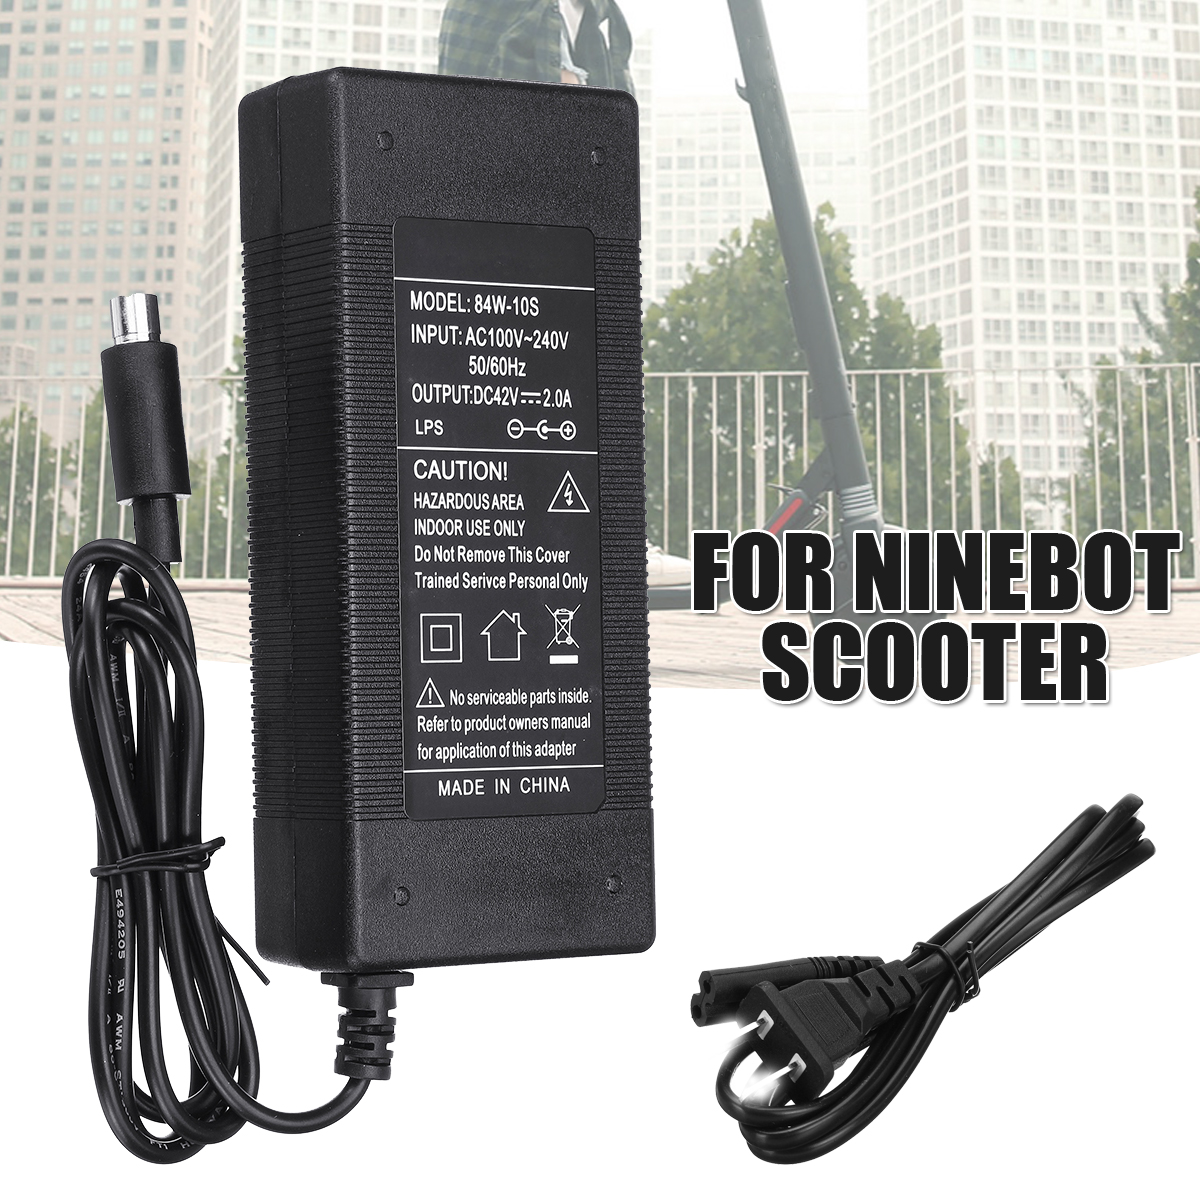 DC42V-17A-Lithium-Battery-Charger-Battery-Equipment-for-Scooter-For-Ninebot-Scooter-1417293-1